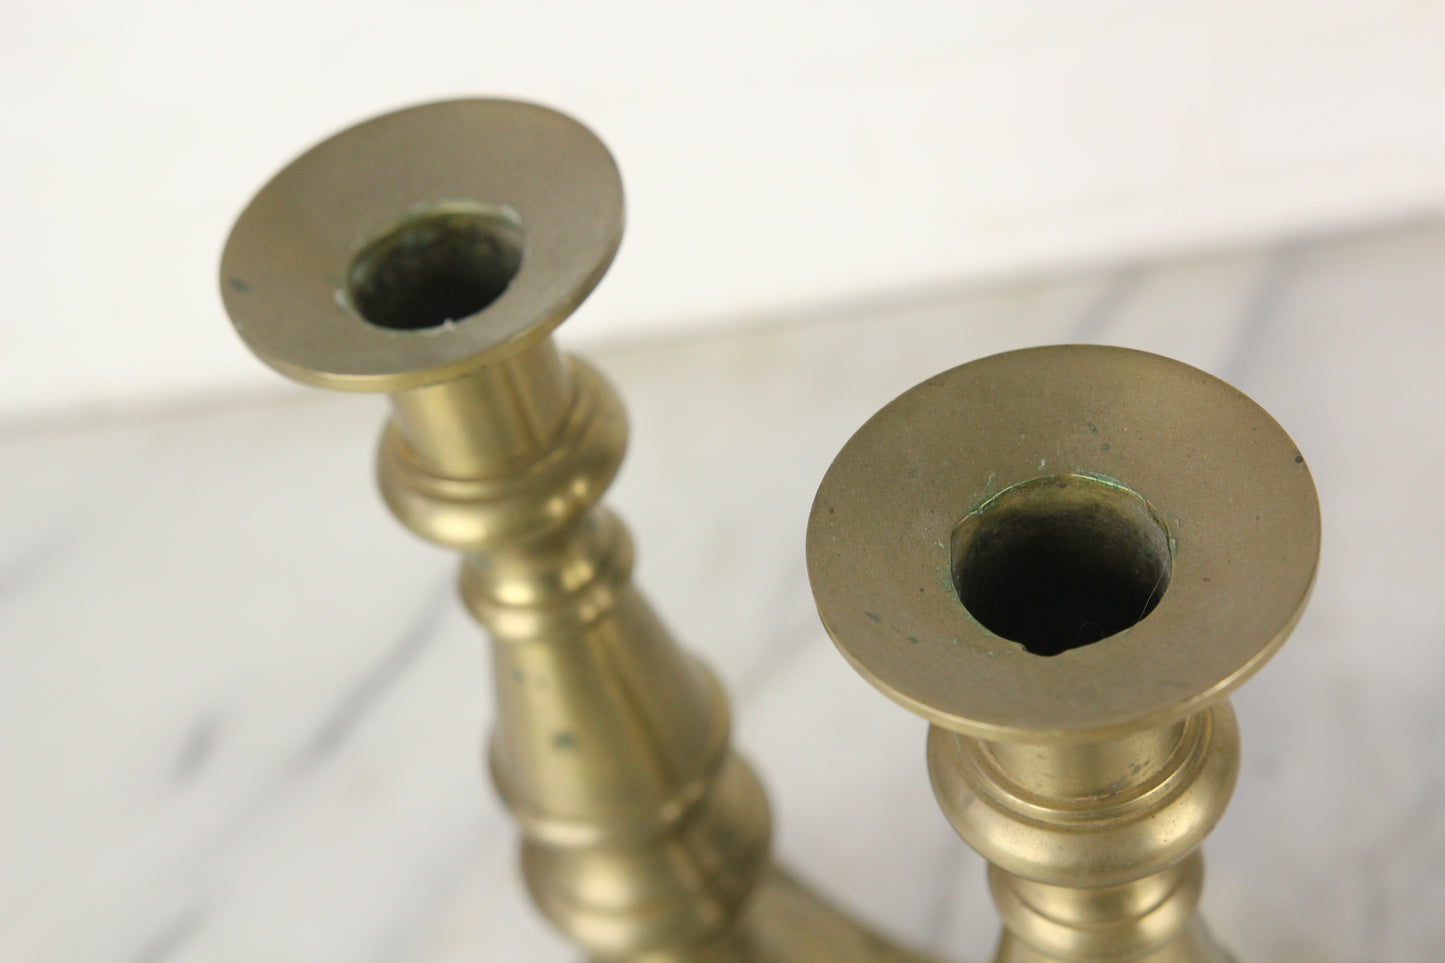 Solid Brass Candlesticks, Marked China, Pair - 10"